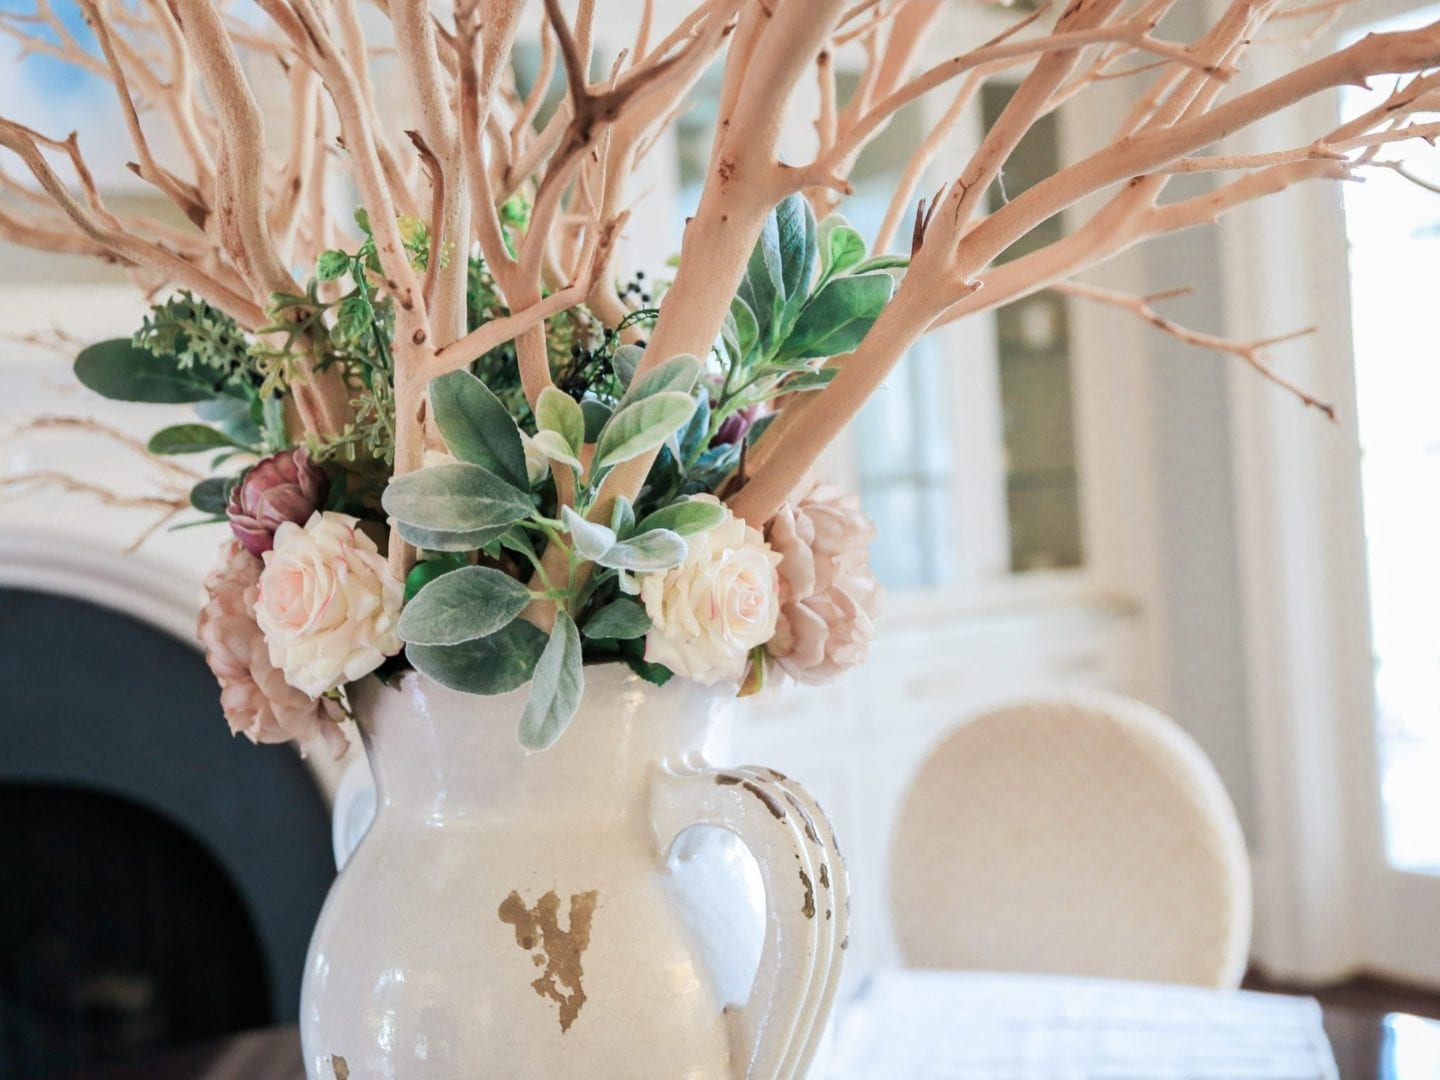 Atlanta blogger - lifestyle blogger creating home centerpiece inspiration with manzanita branches in dining room.